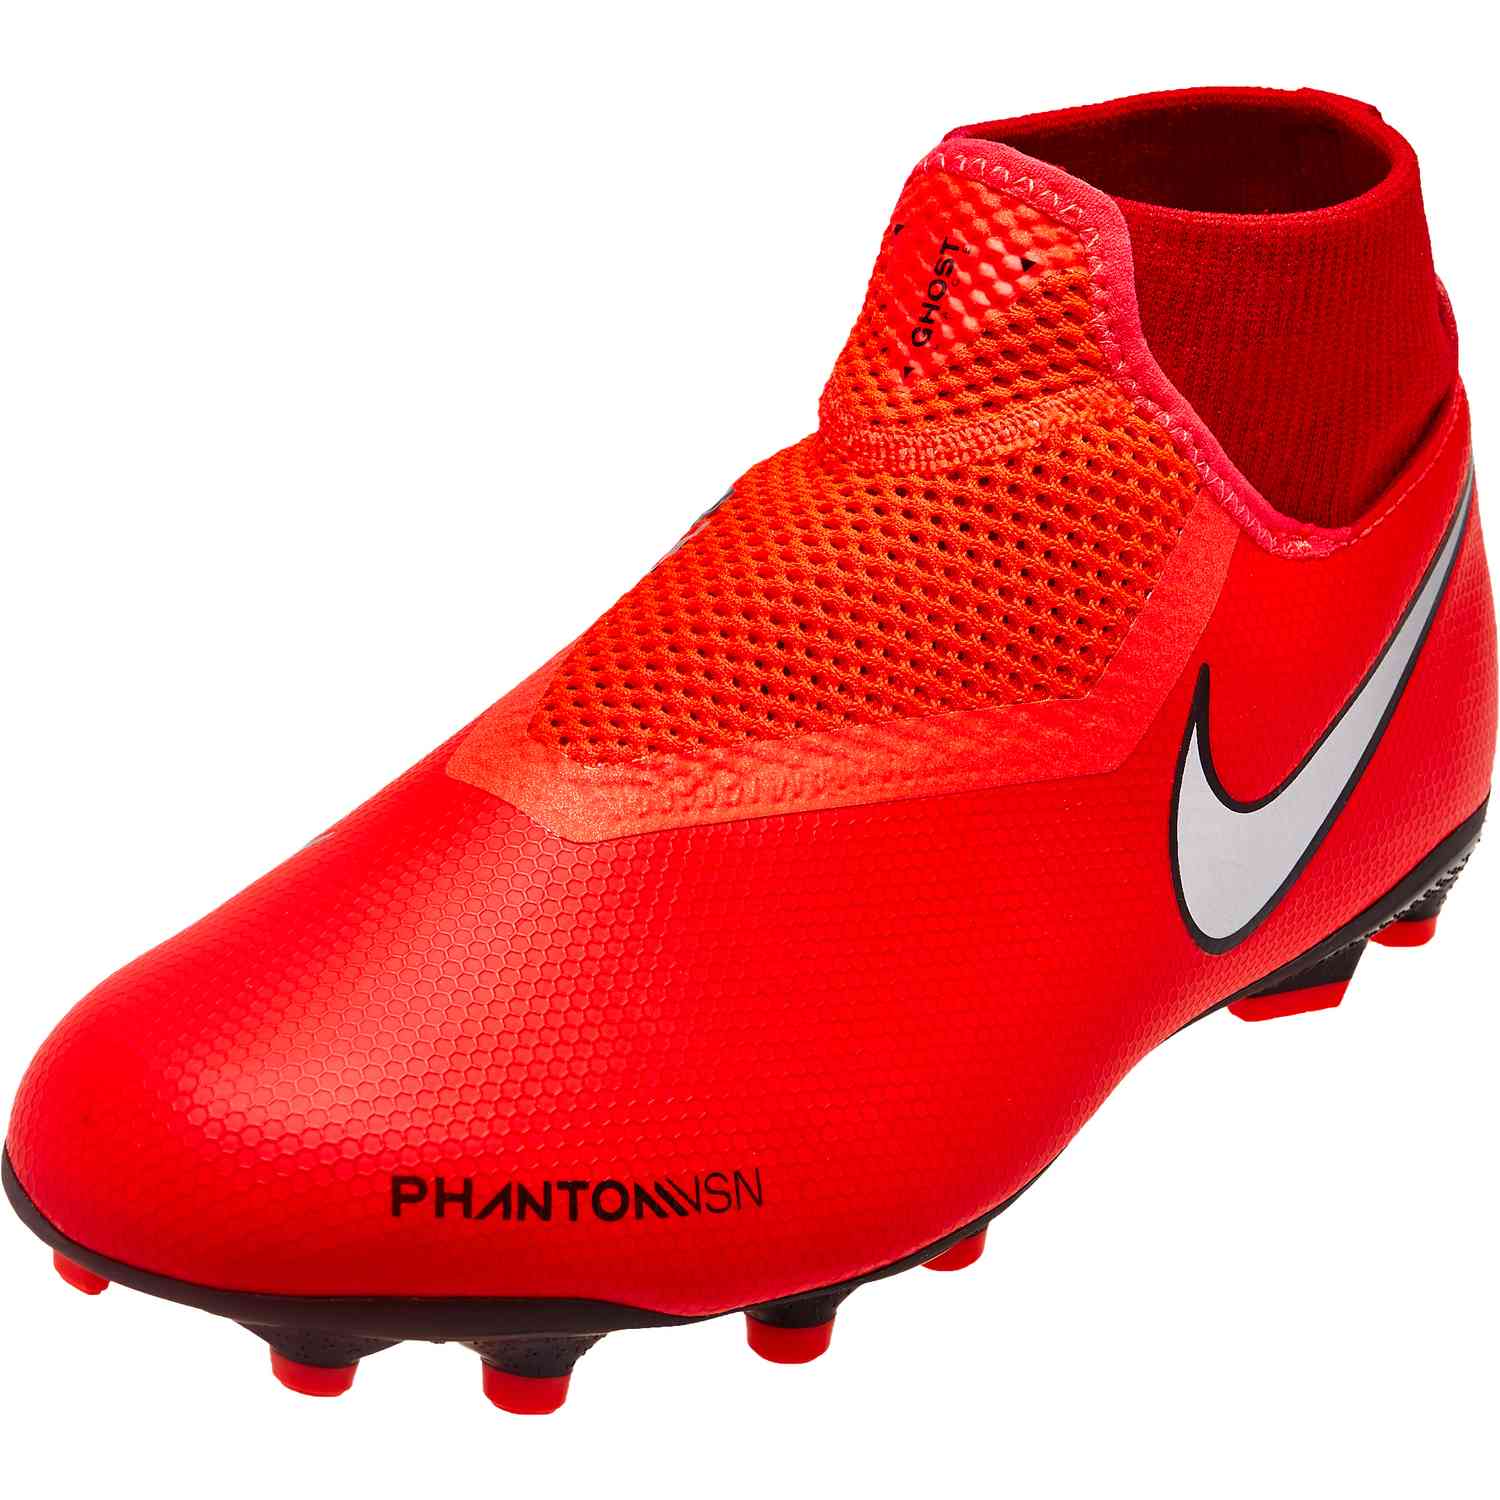 bright soccer cleats